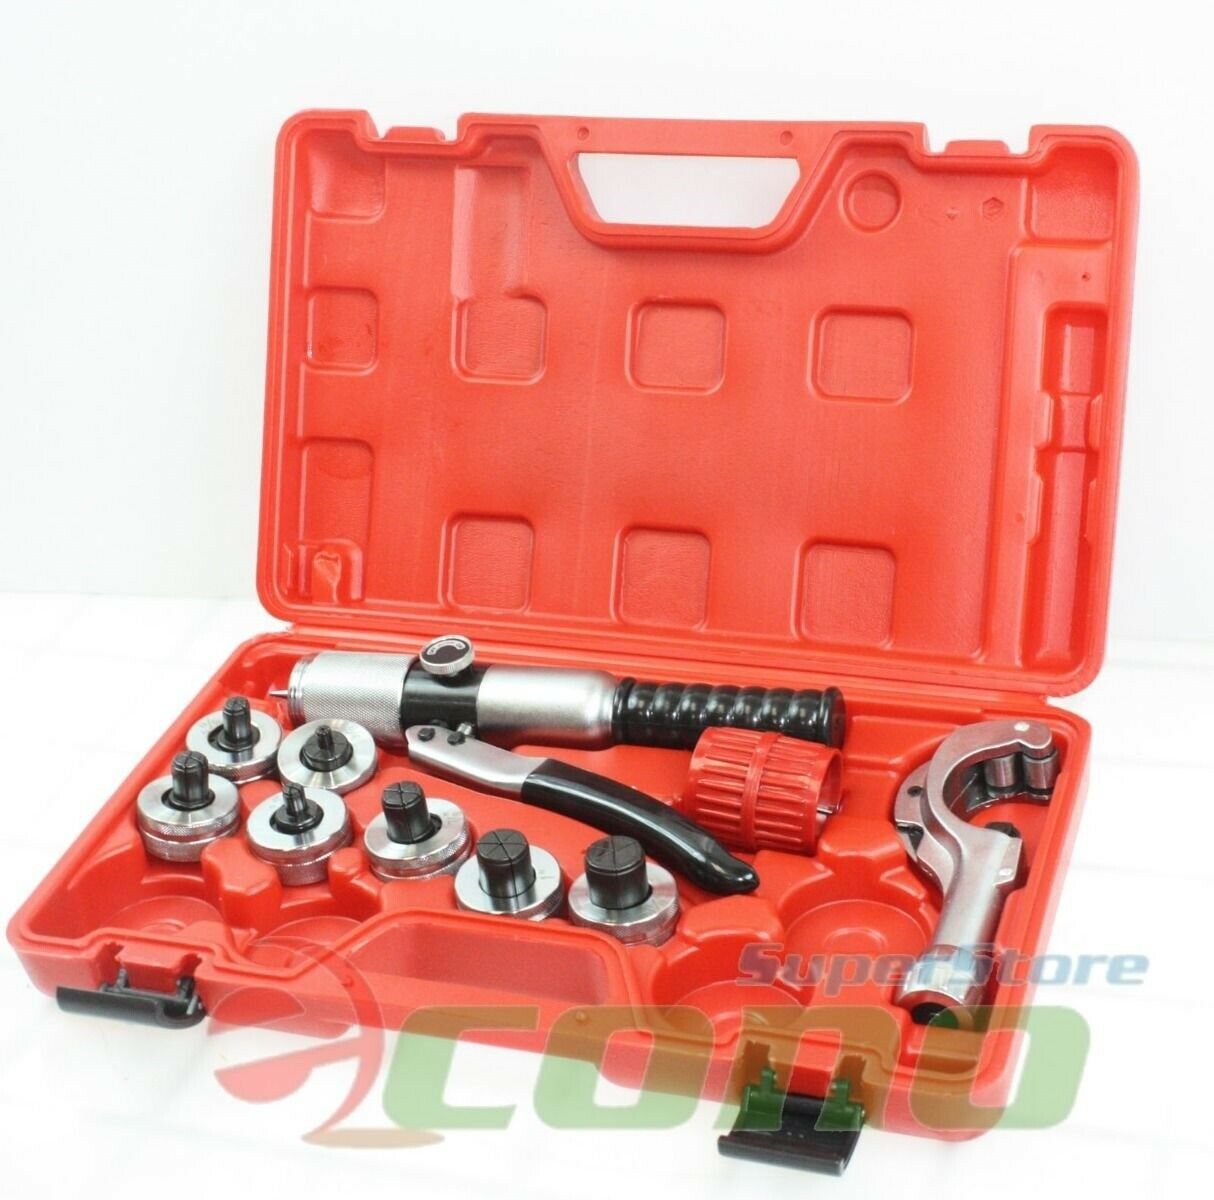 Hydraulic HVAC Tube Expander Swaging 7 Lever Expander Tools Kit Tool 3/8"-1-1/8" 